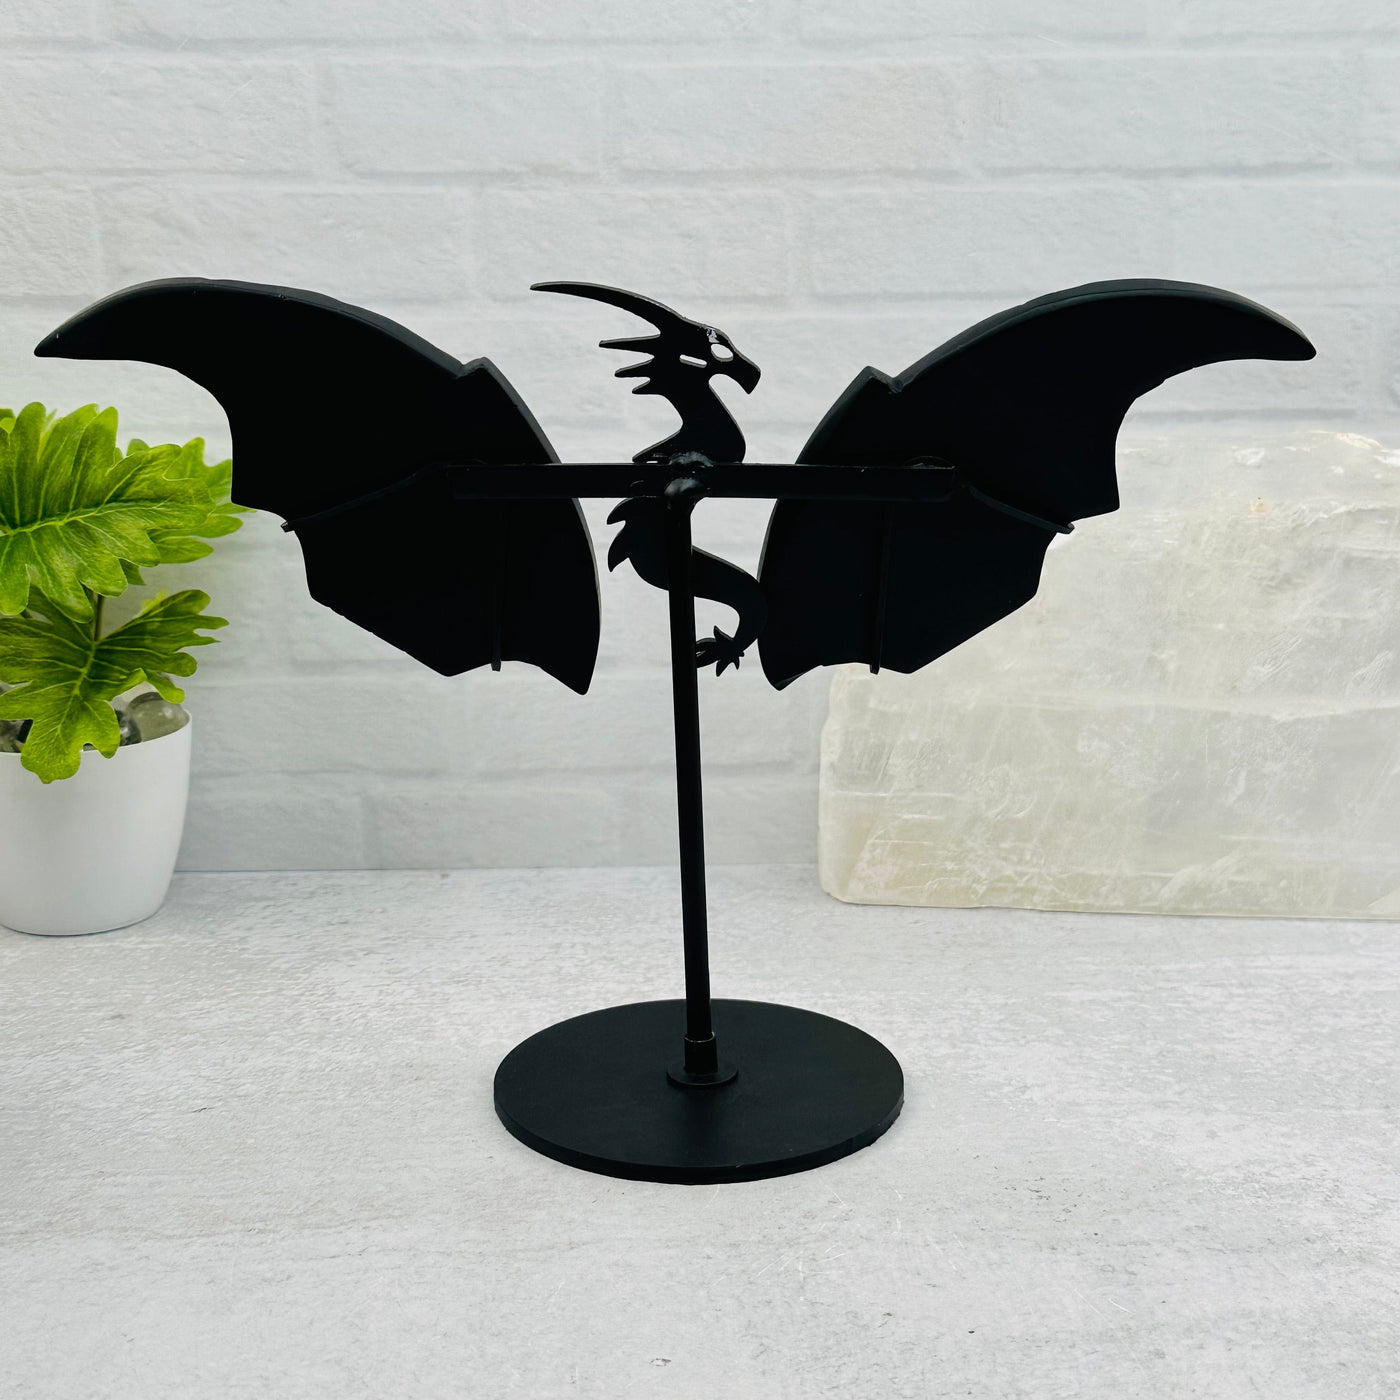 back side of the Black Obsidian Dragon on Stand